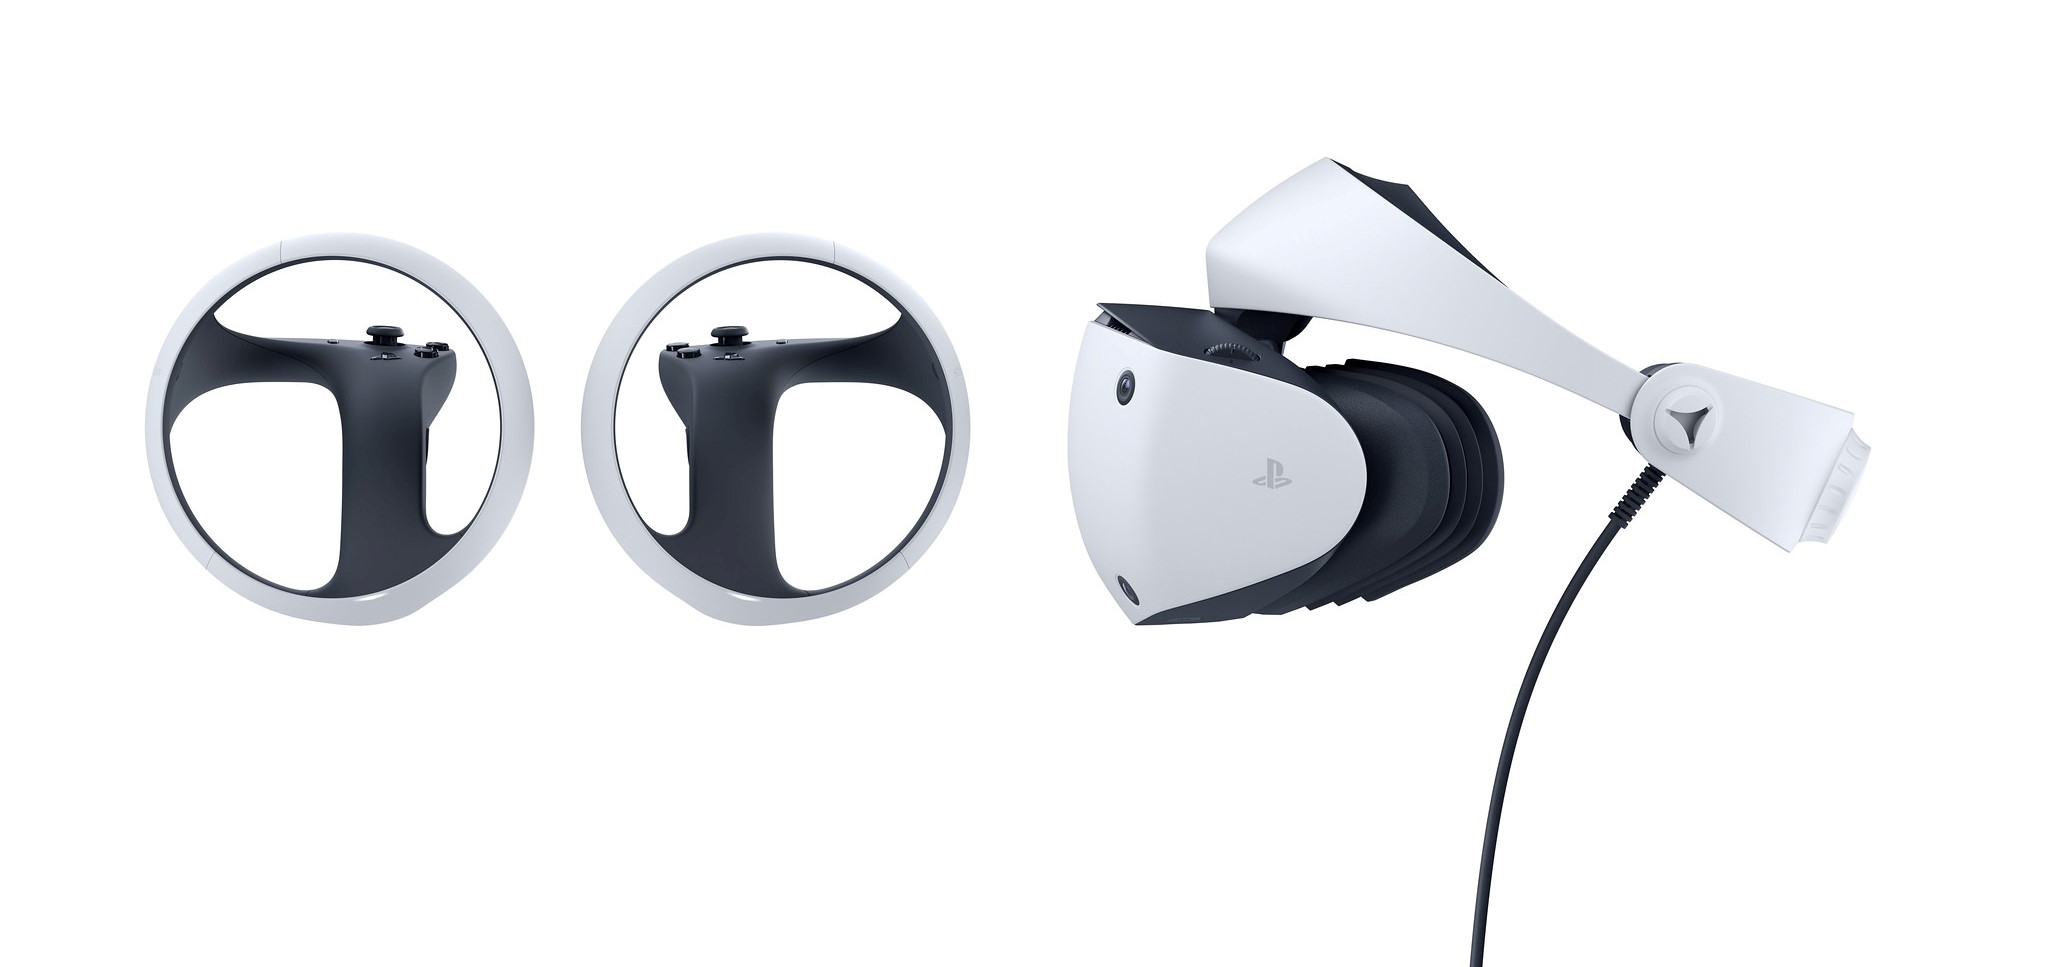 PlayStation VR2 design revealed: First look, specs and more